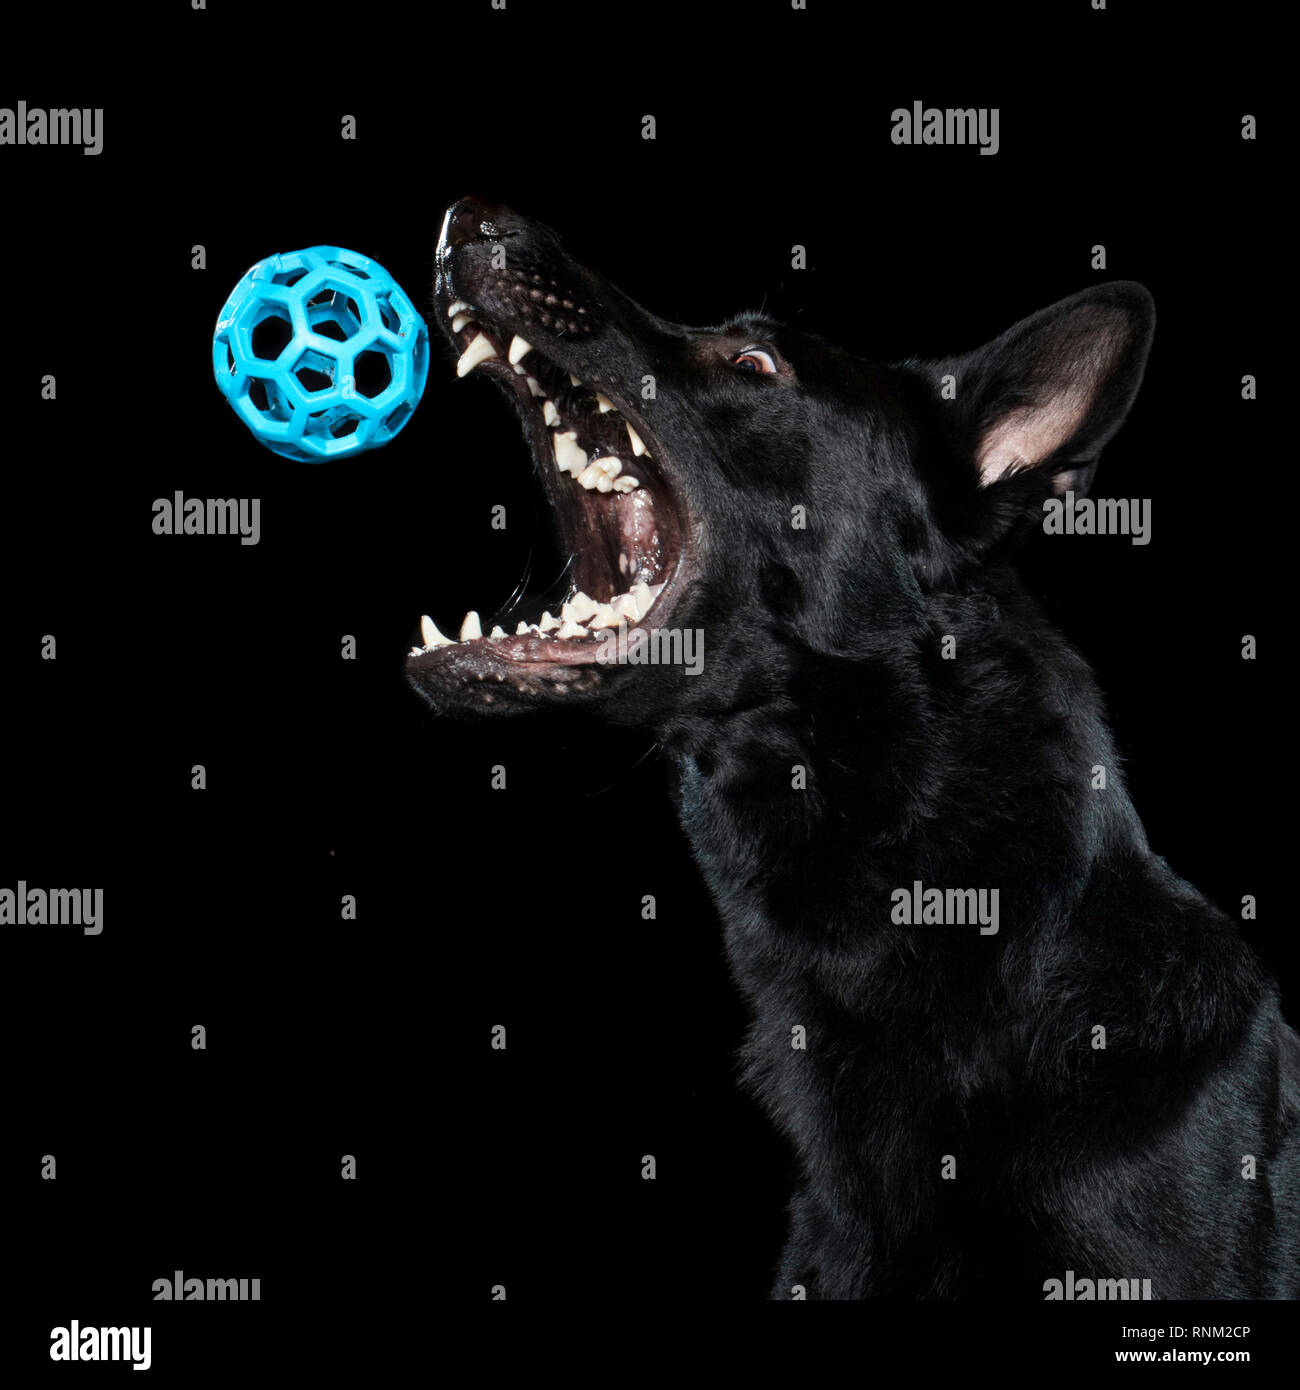 German Shepherd, Alsatian. Juvenile catching a ball. Studio picture against a black background. Germany Stock Photo